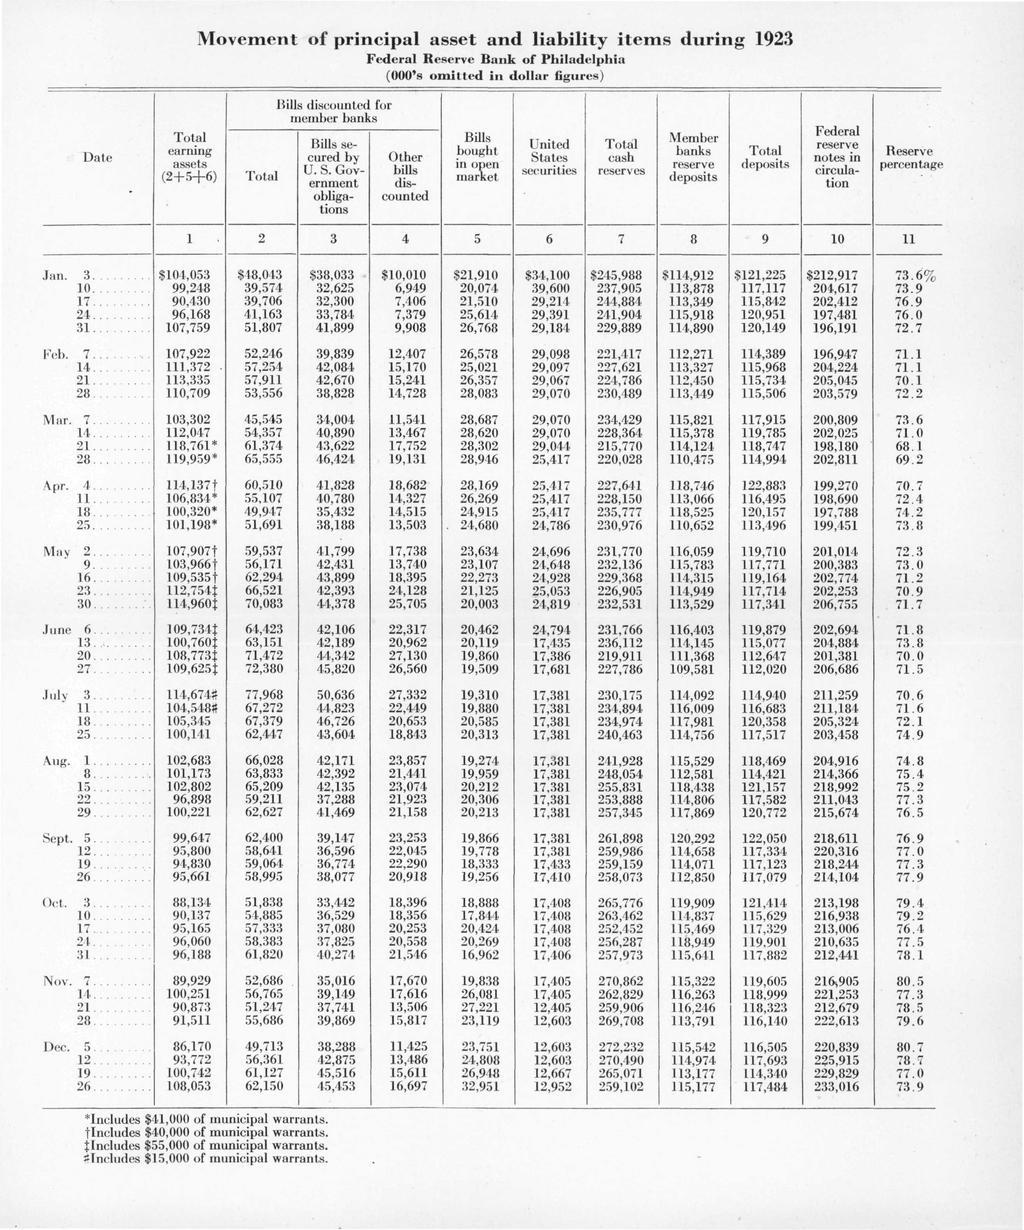 Movement of principal asset and liability items during 1923 Federal Reserve Bank of Philadelphia (000's omitted in dollar figures) Mills discounted for member banks Total Date earning assets (2+5+6)